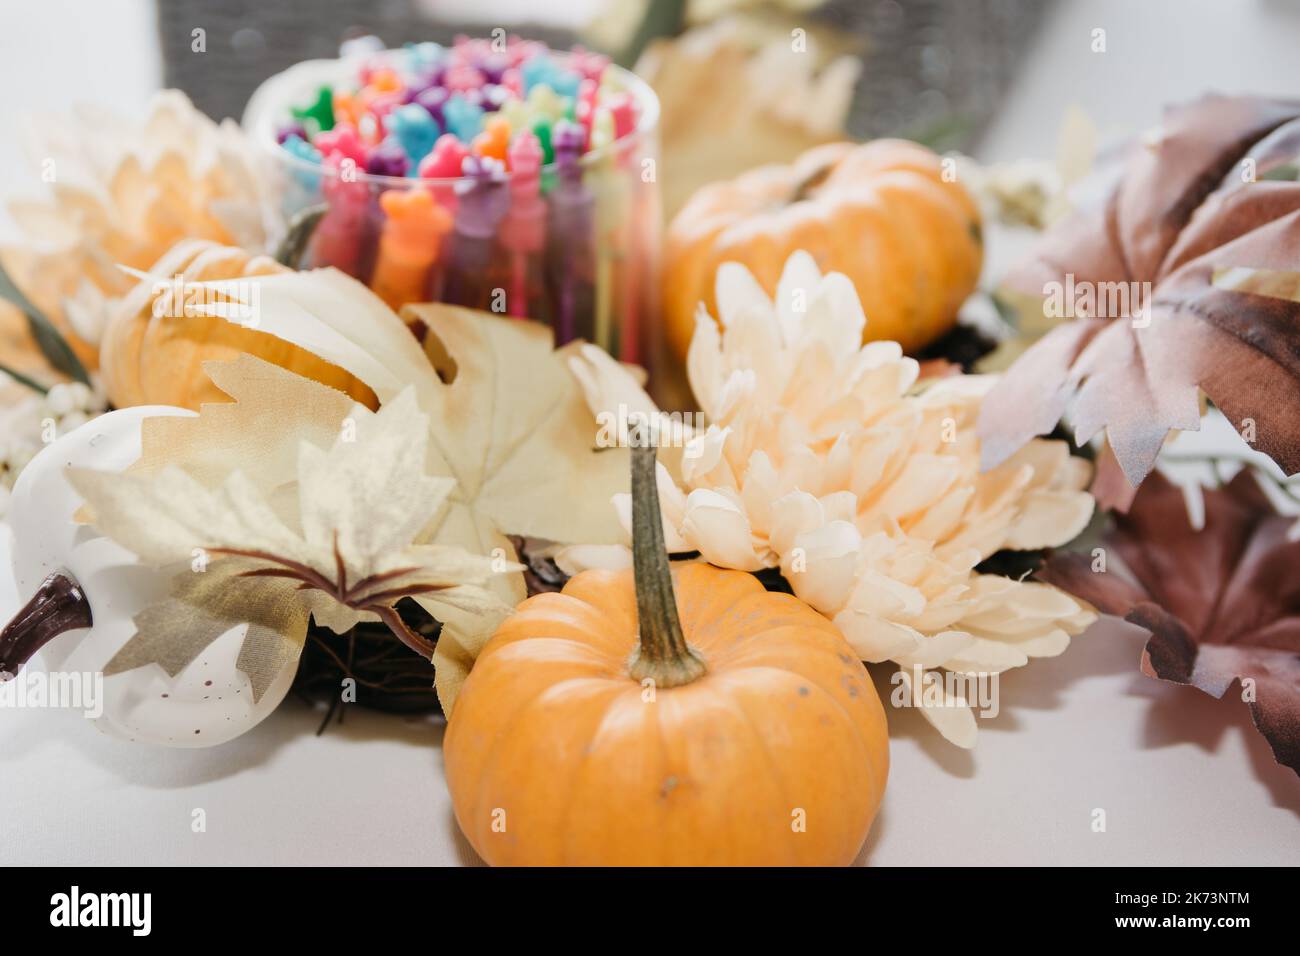 Autumn Wedding Cake covered in sweet fall coloured leaves Stock Photo